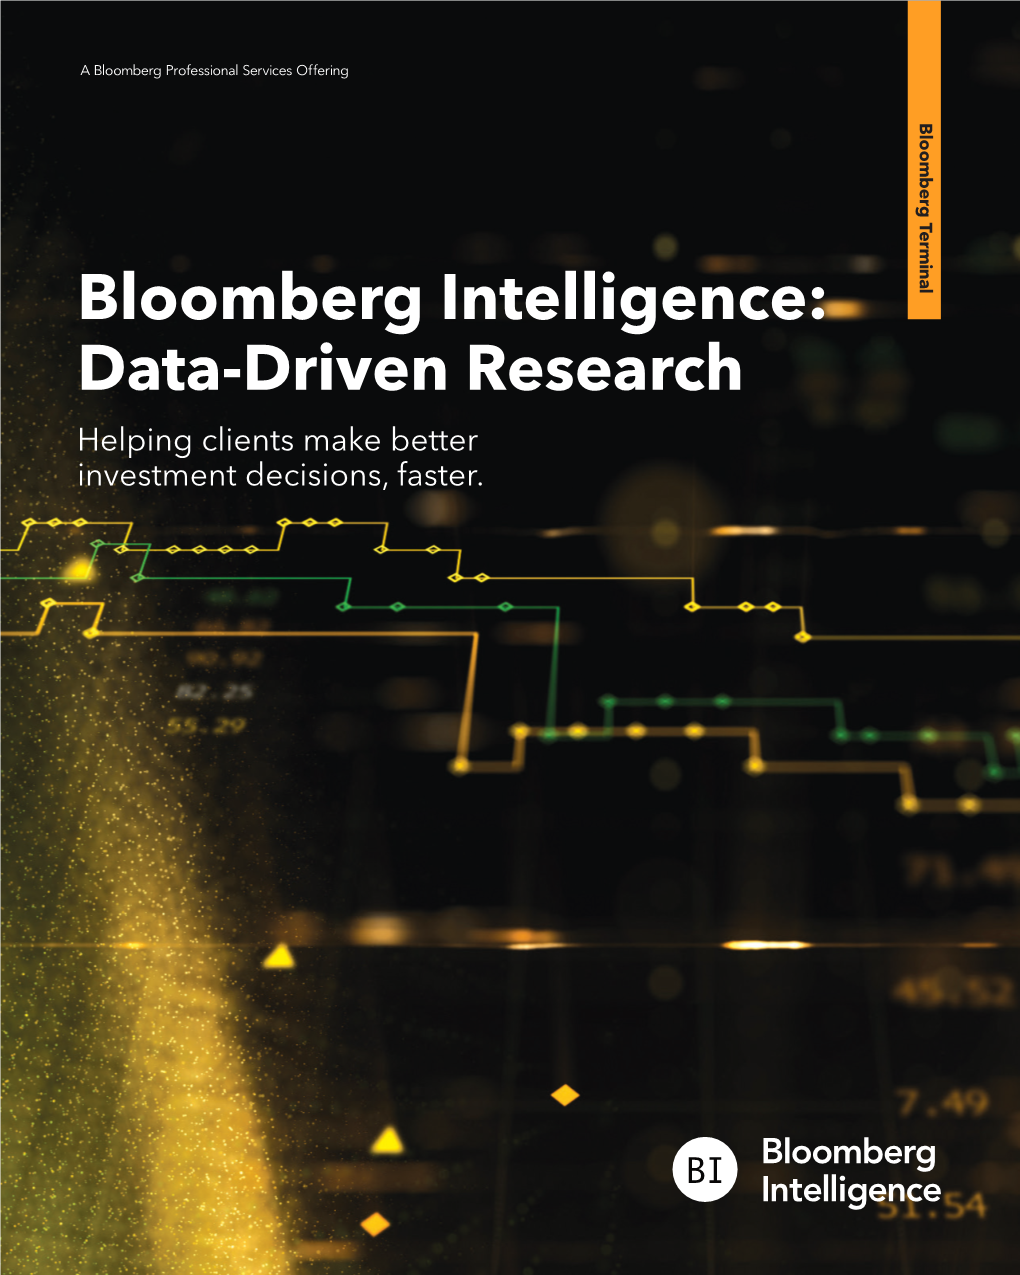 Bloomberg Intelligence: Data-Driven Research Helping Clients Make Better Investment Decisions, Faster